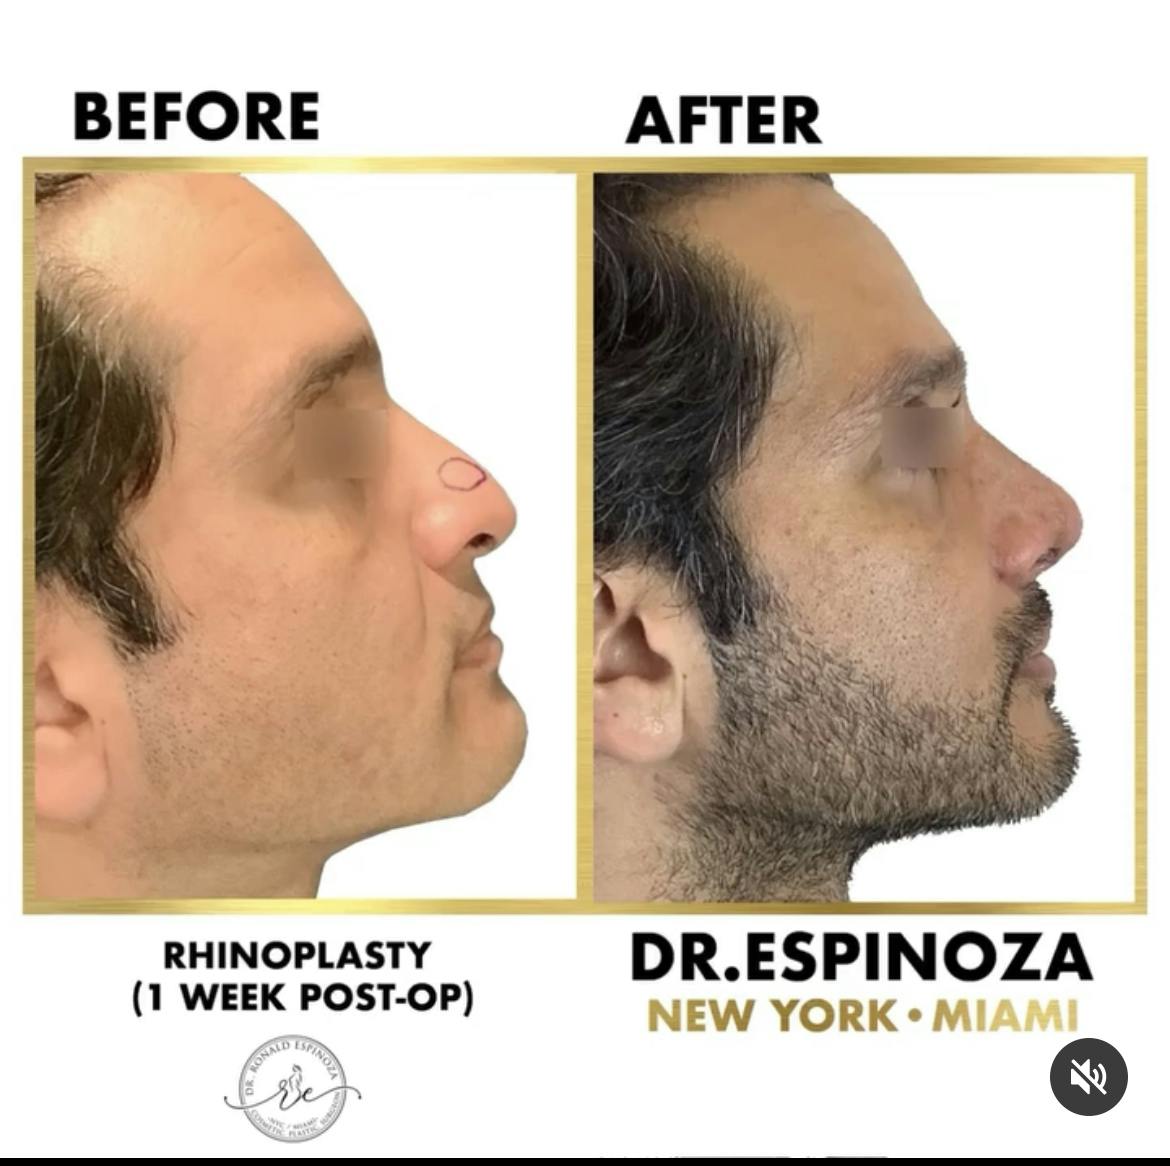 Before and After Rhinoplasty by Dr. Espinoza